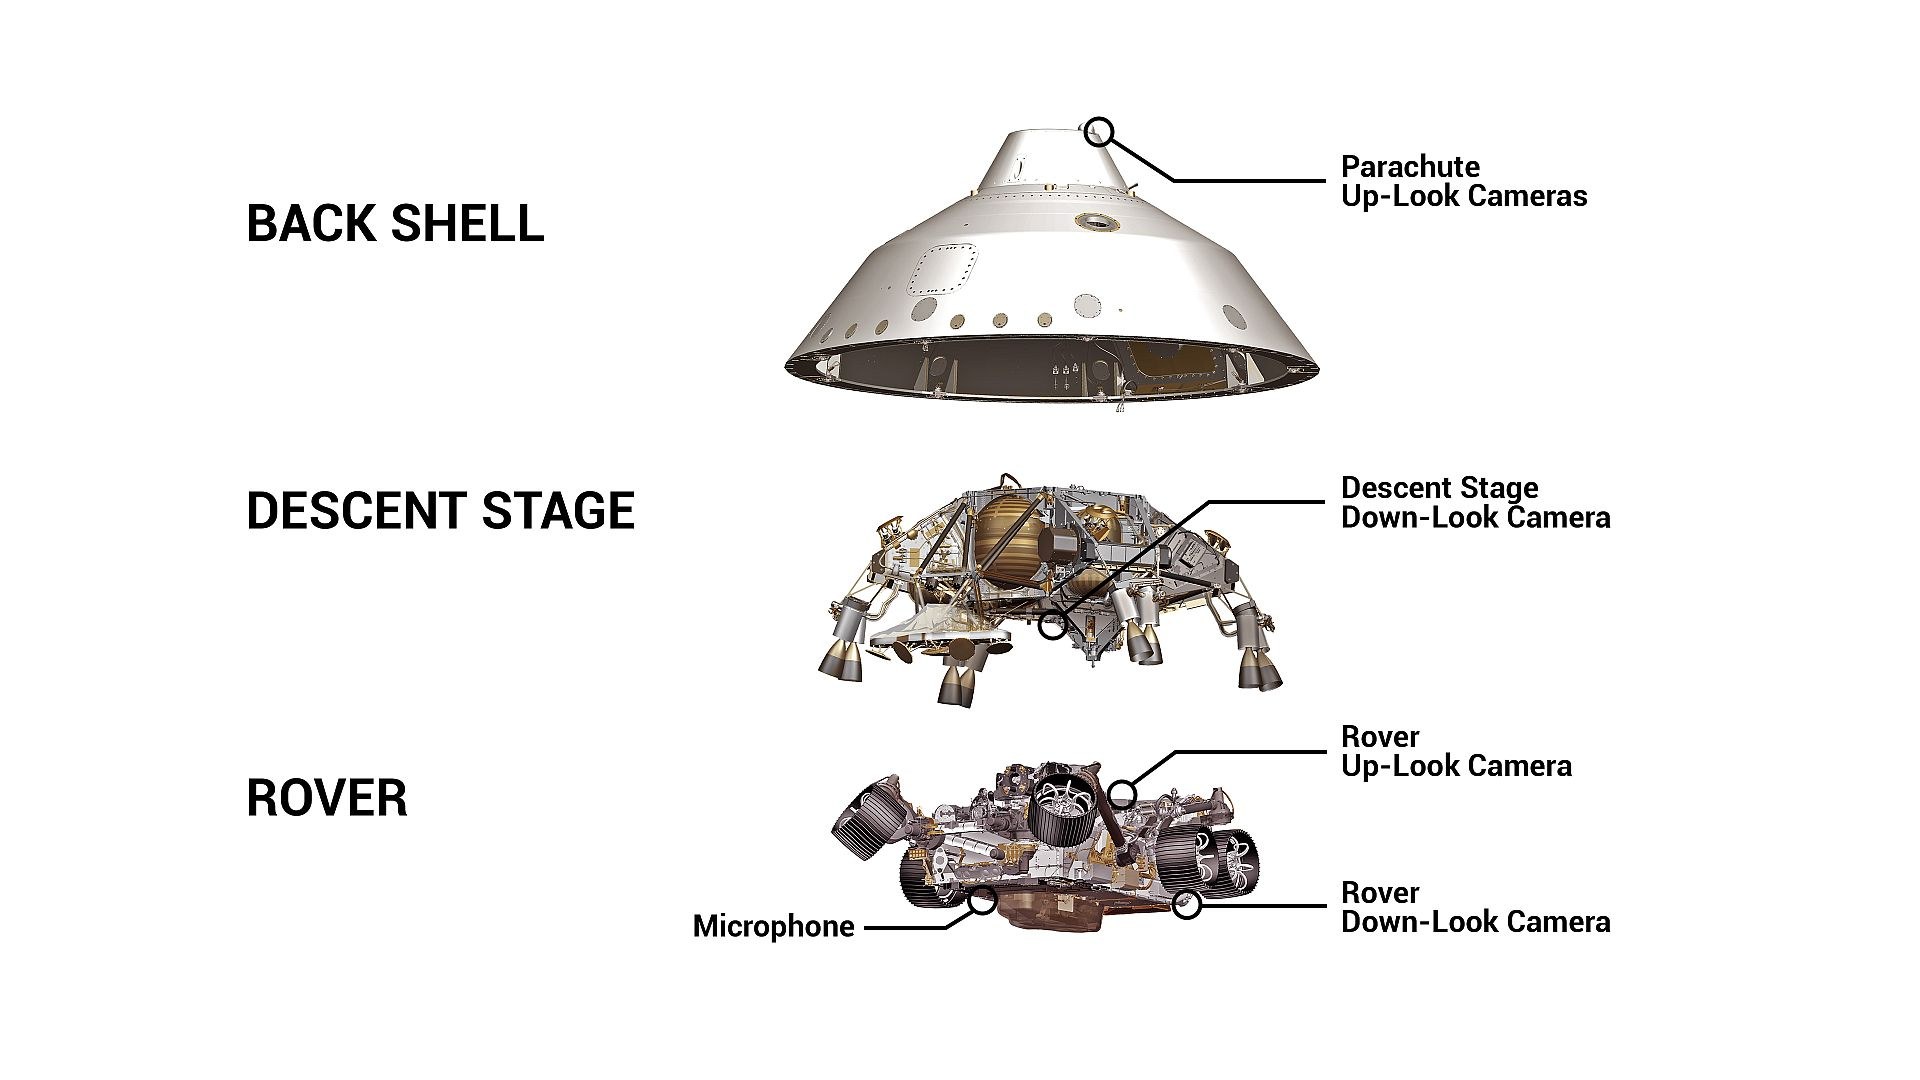 Structure of the descent stage